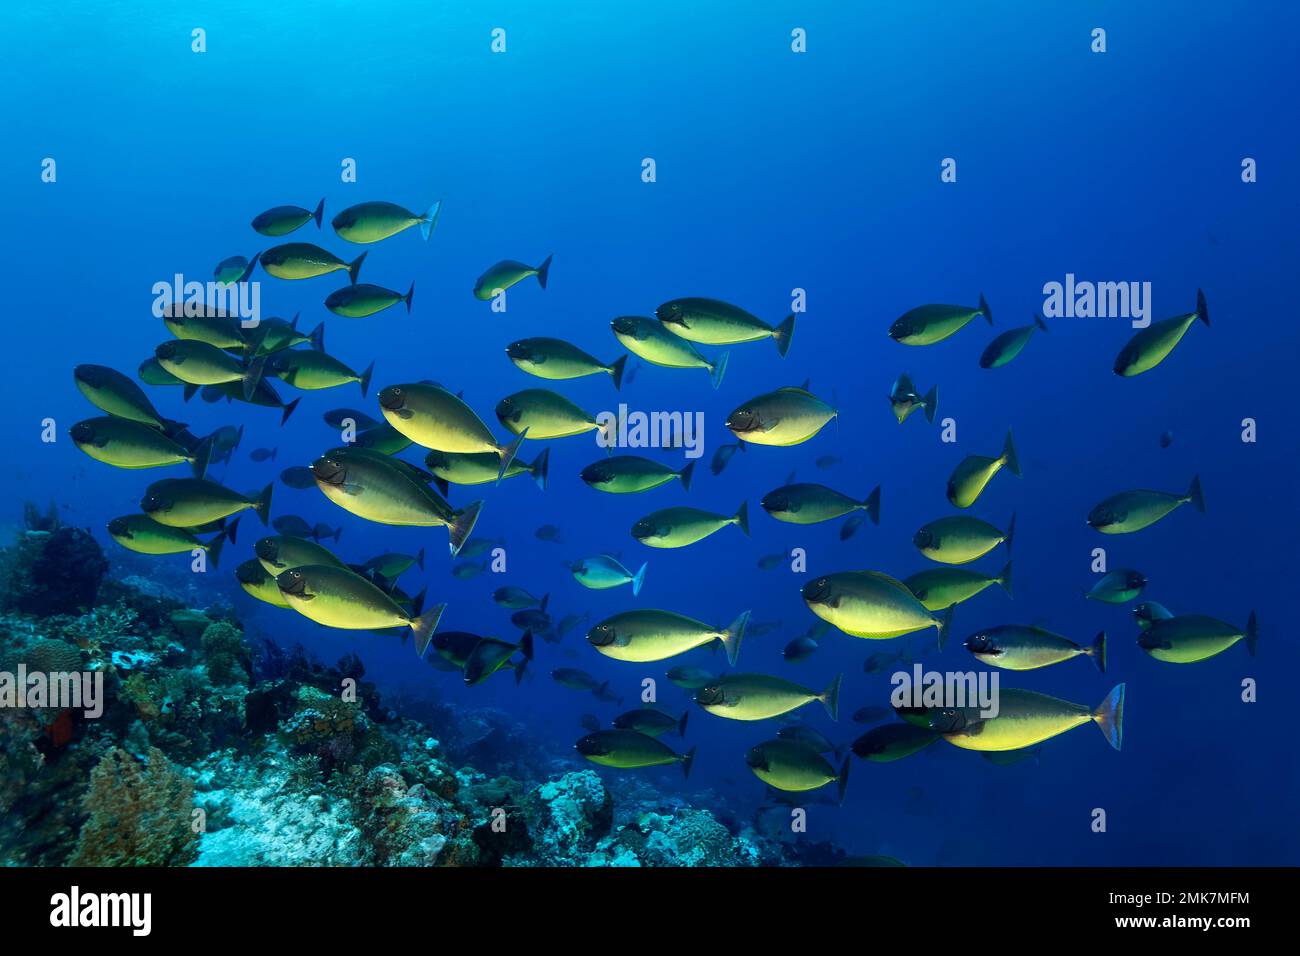 Shoal of smooth bluetail unicornfish (Naso hexacanthus) swimming over coral reef, Pacific Ocean, Great Barrier Reef, Unesco World Heritage Site Stock Photo